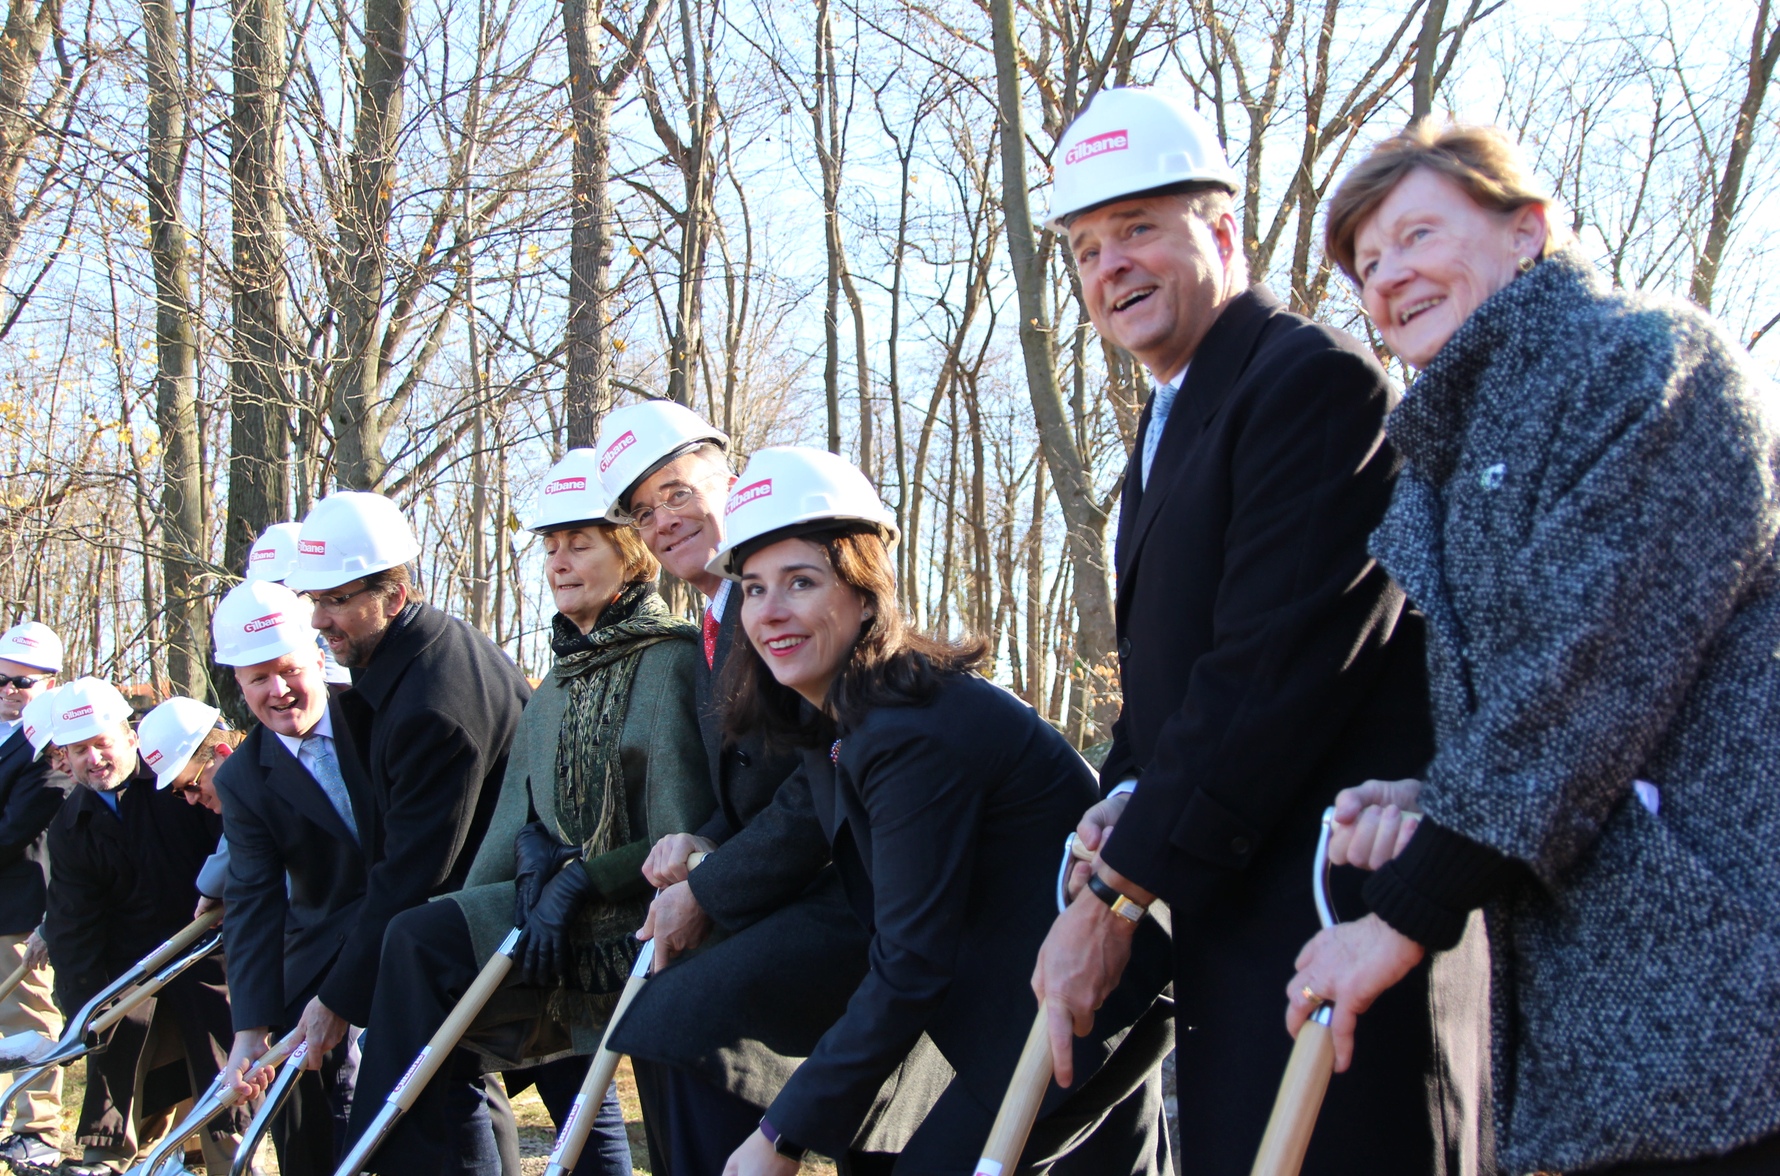 Last three from right, Clare Kilgallen, Tony Turner (BET) and Barbara O'Neill (BOE) at the ground breaking of the new New Lebanon School, Dec 7, 2017 Photo: Leslie Yager